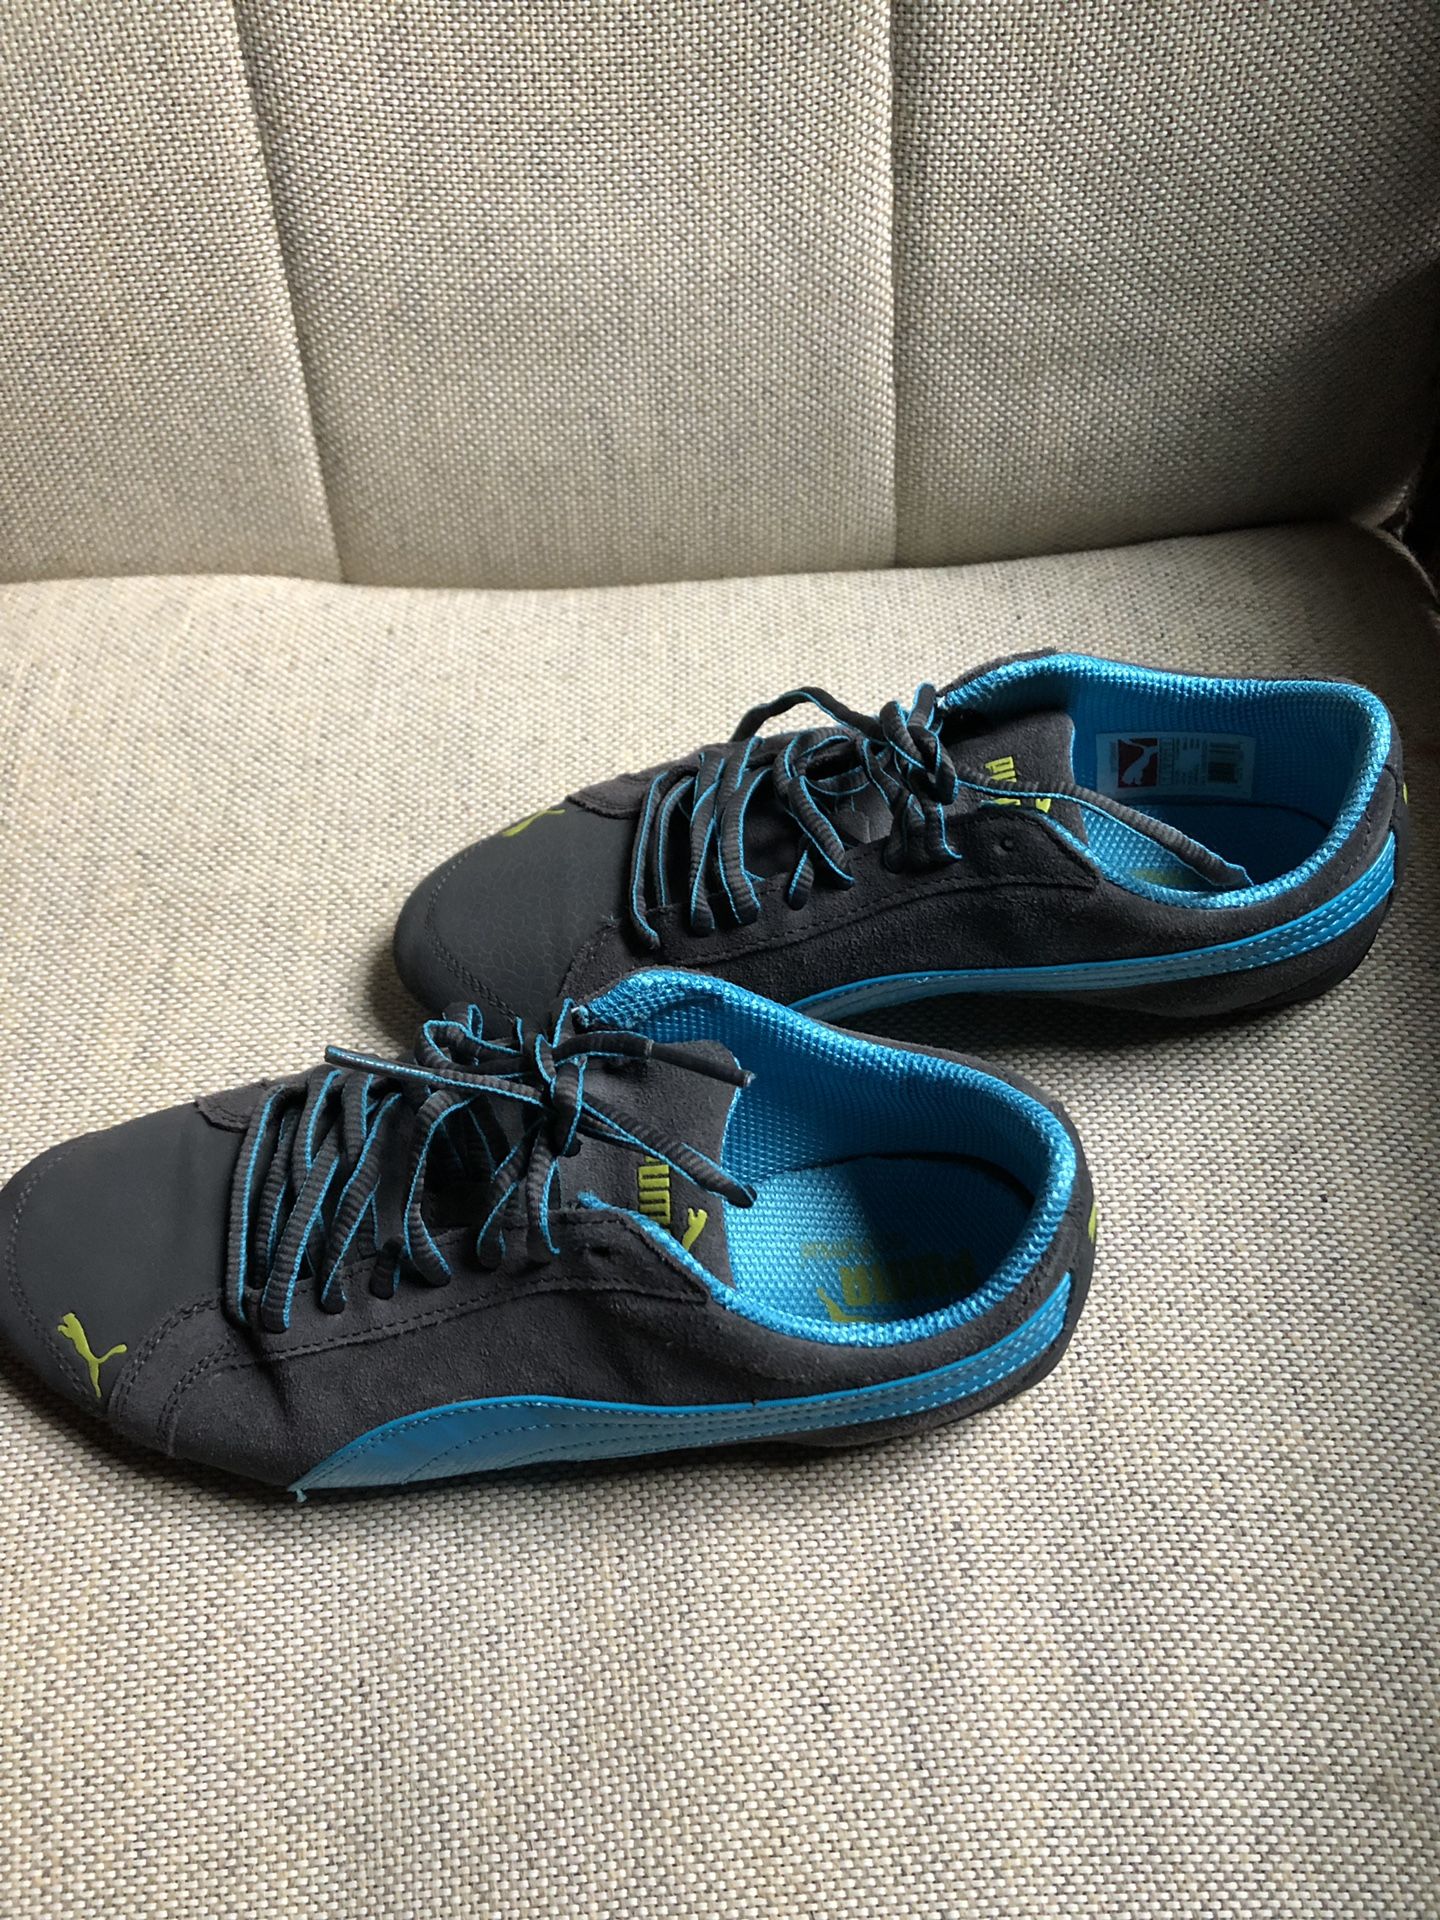 Women’s Puma shoes, size 8.5 M. Brand New, Never been worn.